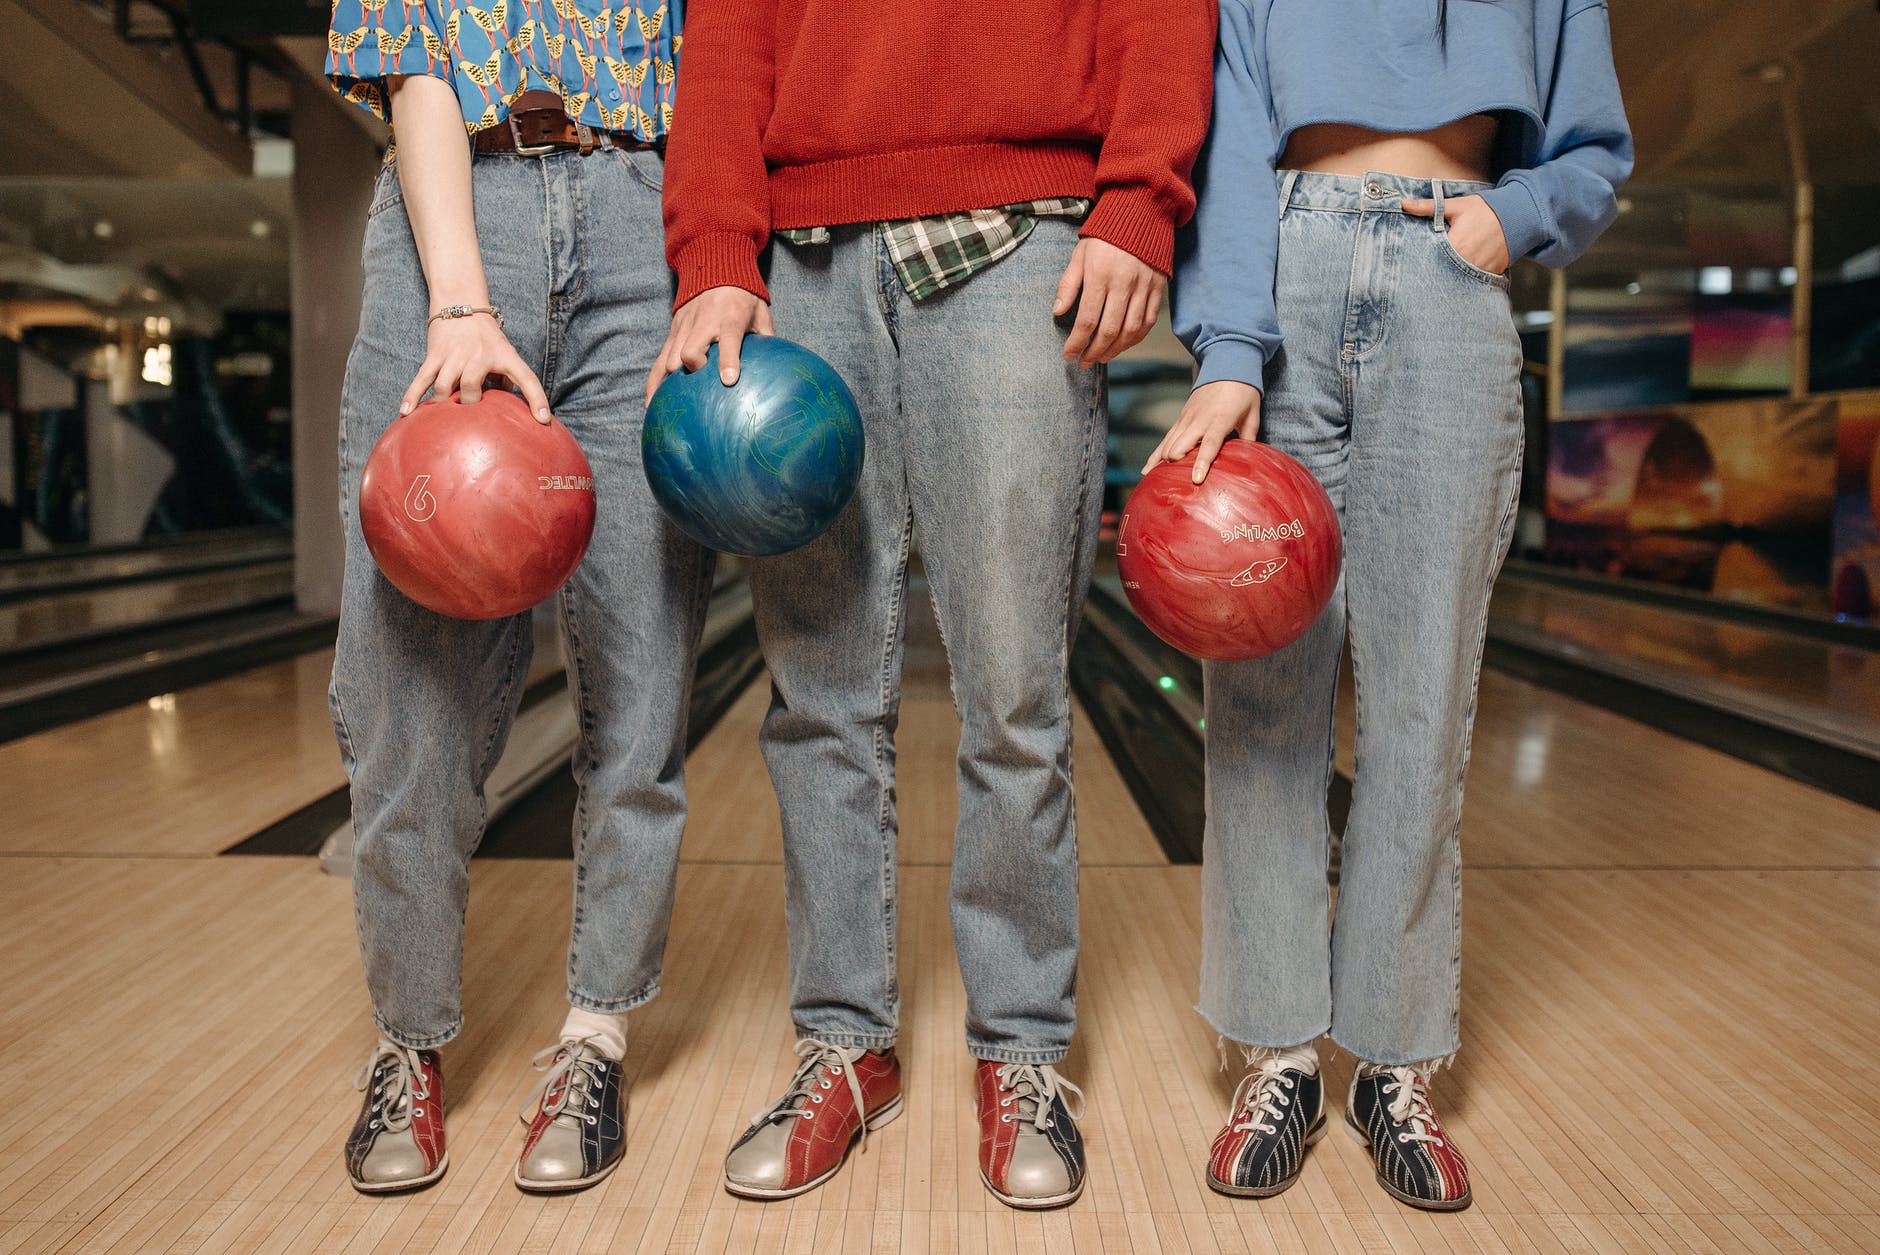 people in gray denim jeans holding bowling balls standing side by side